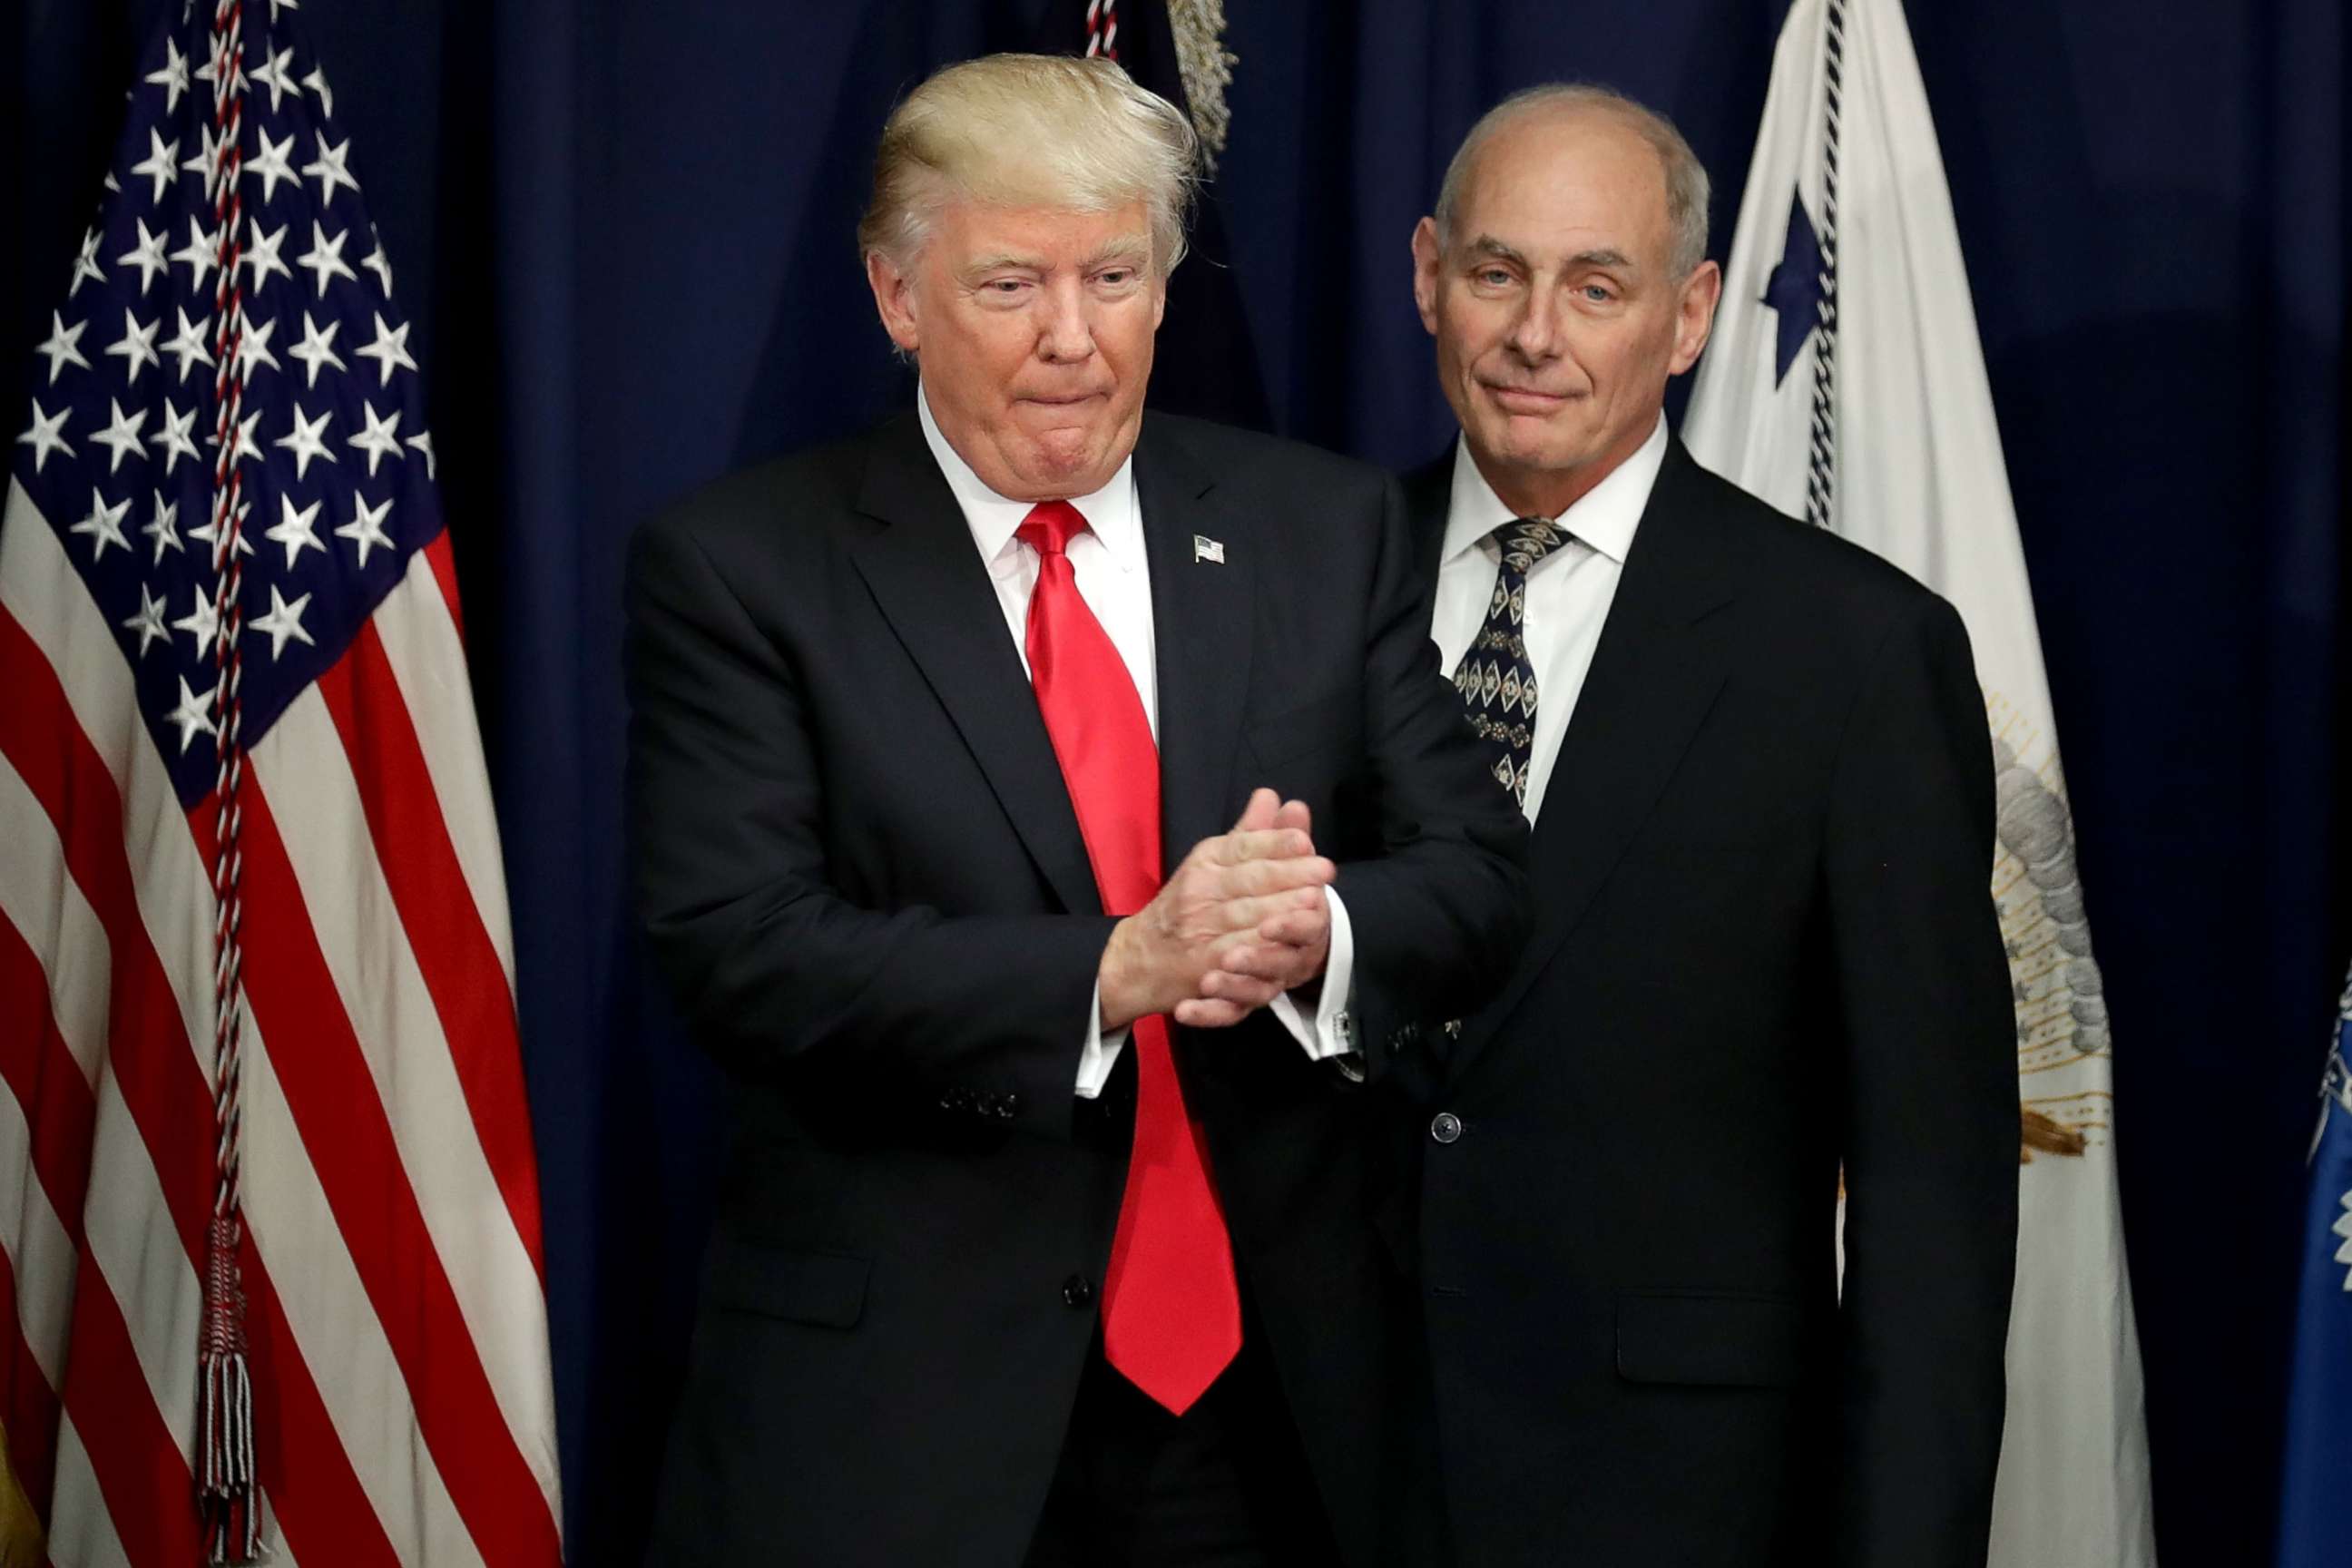 PHOTO: President Donald Trump is joined by Homeland Security Secretary John Kelly (R) during a visit to the Department of Homeland Security, Jan. 25, 2017 in Washington, D.C.